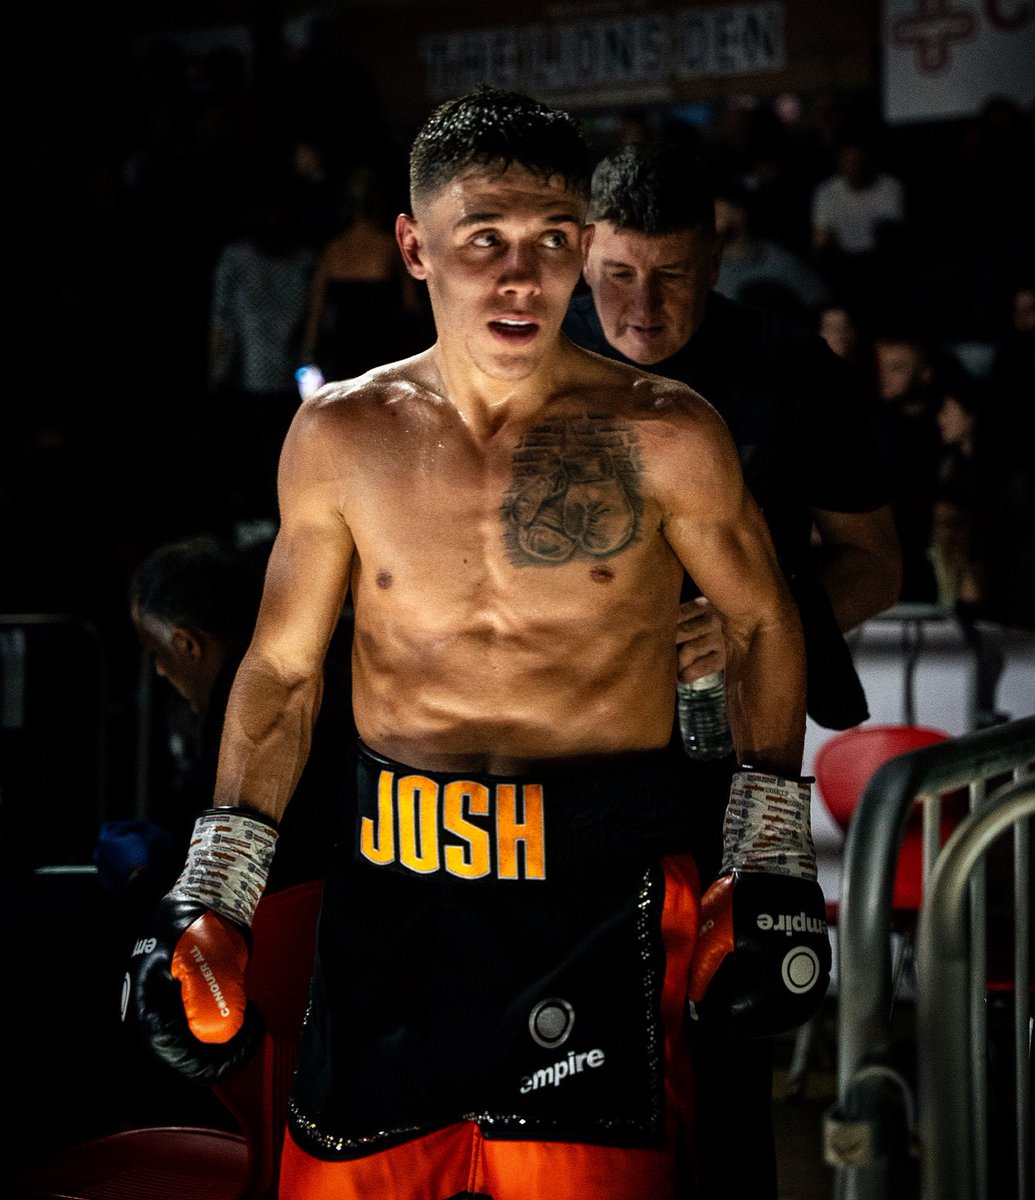 FIGHT WEEK FOR ‘THE BUSINESS’ 🥊 Josh Babb 2nd fight, 2nd 6 rounder against the tough Nicaraguan Marvin Solano, Josh out to make a statement, you will be entertained! #TheBusiness #OEM